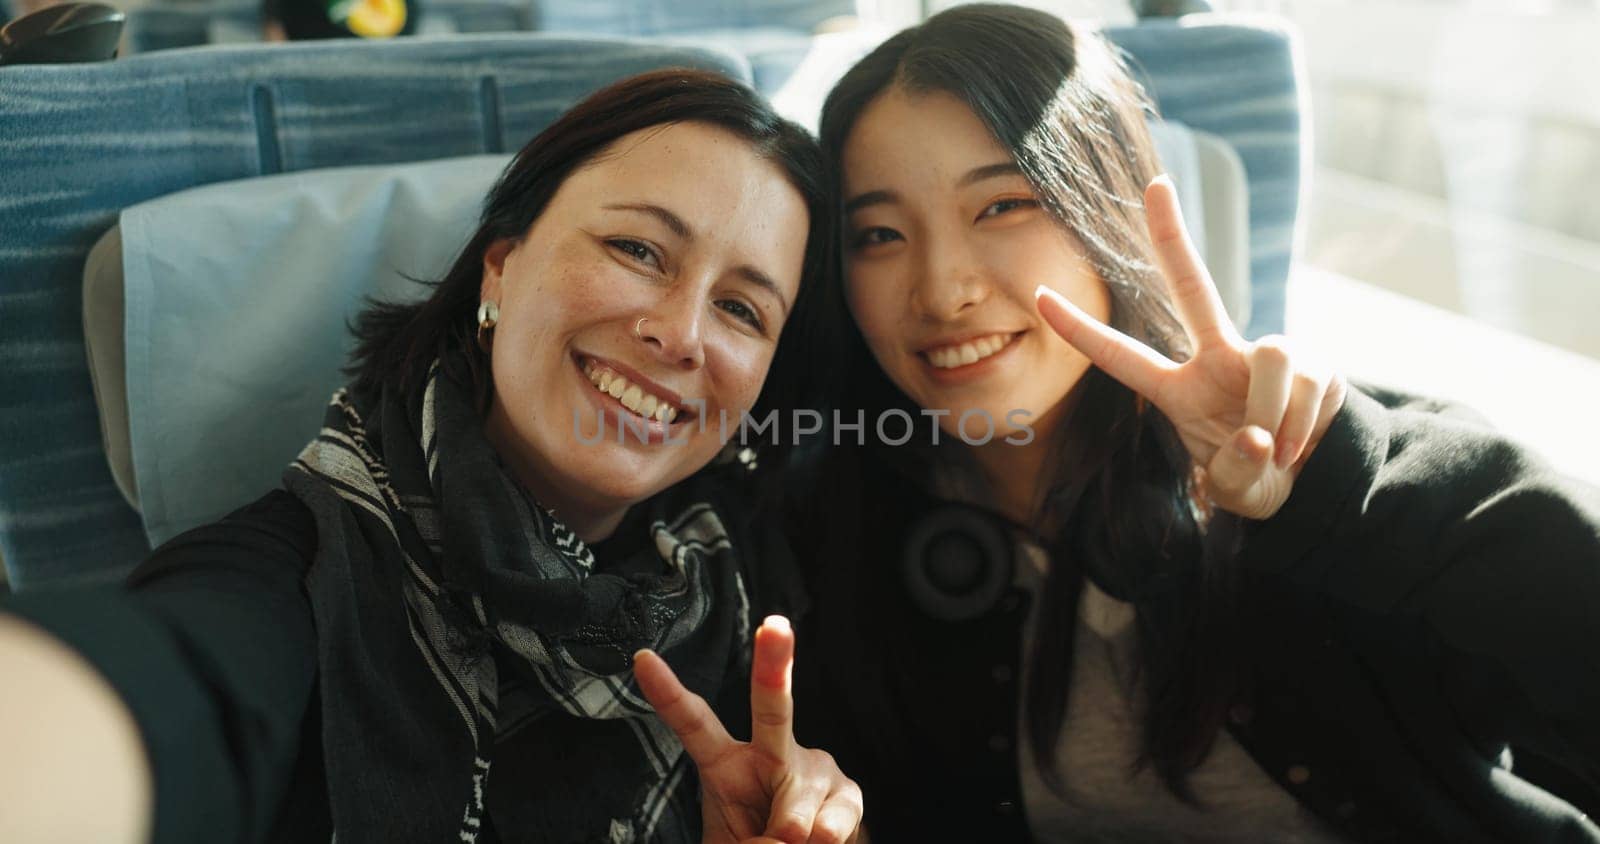 Women, peace sign and selfie on train, portrait and japan public transportation on metro bullet. Friends, emoji and happy face on fast vehicle on vacation trip and commute to tokyo city for adventure.